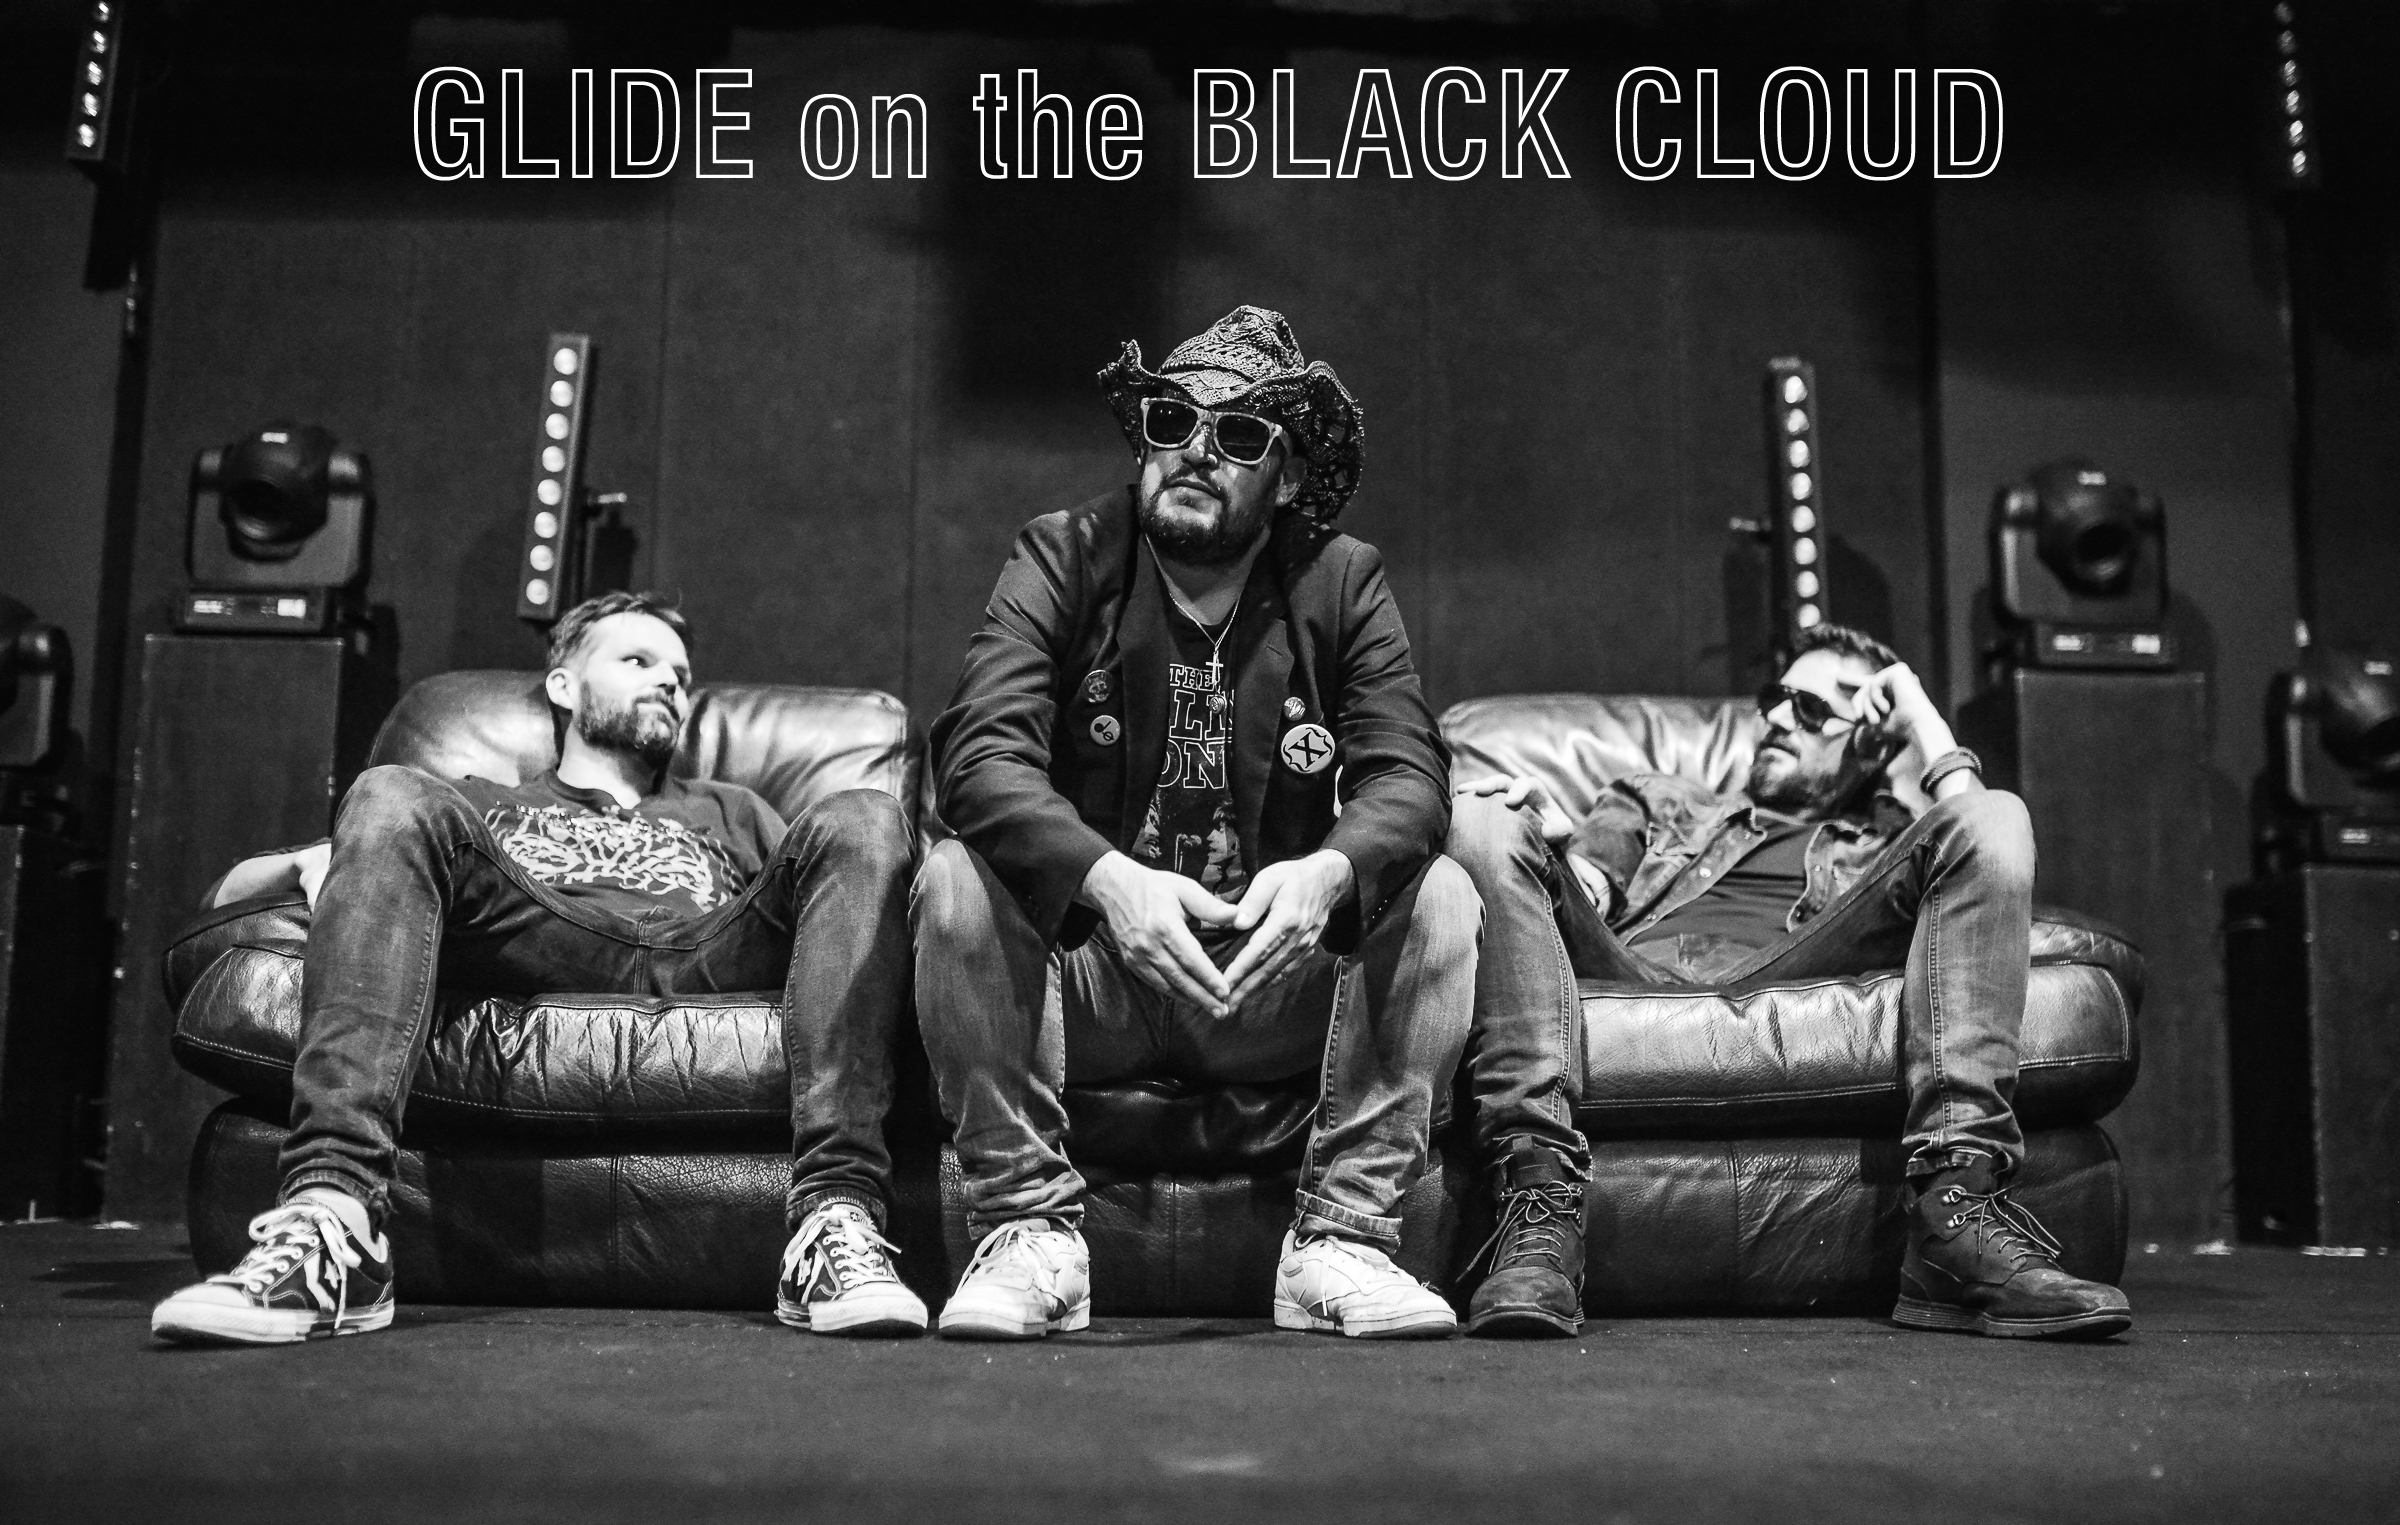 “Switch on your brain”, new video from Glide On The Black Cloud